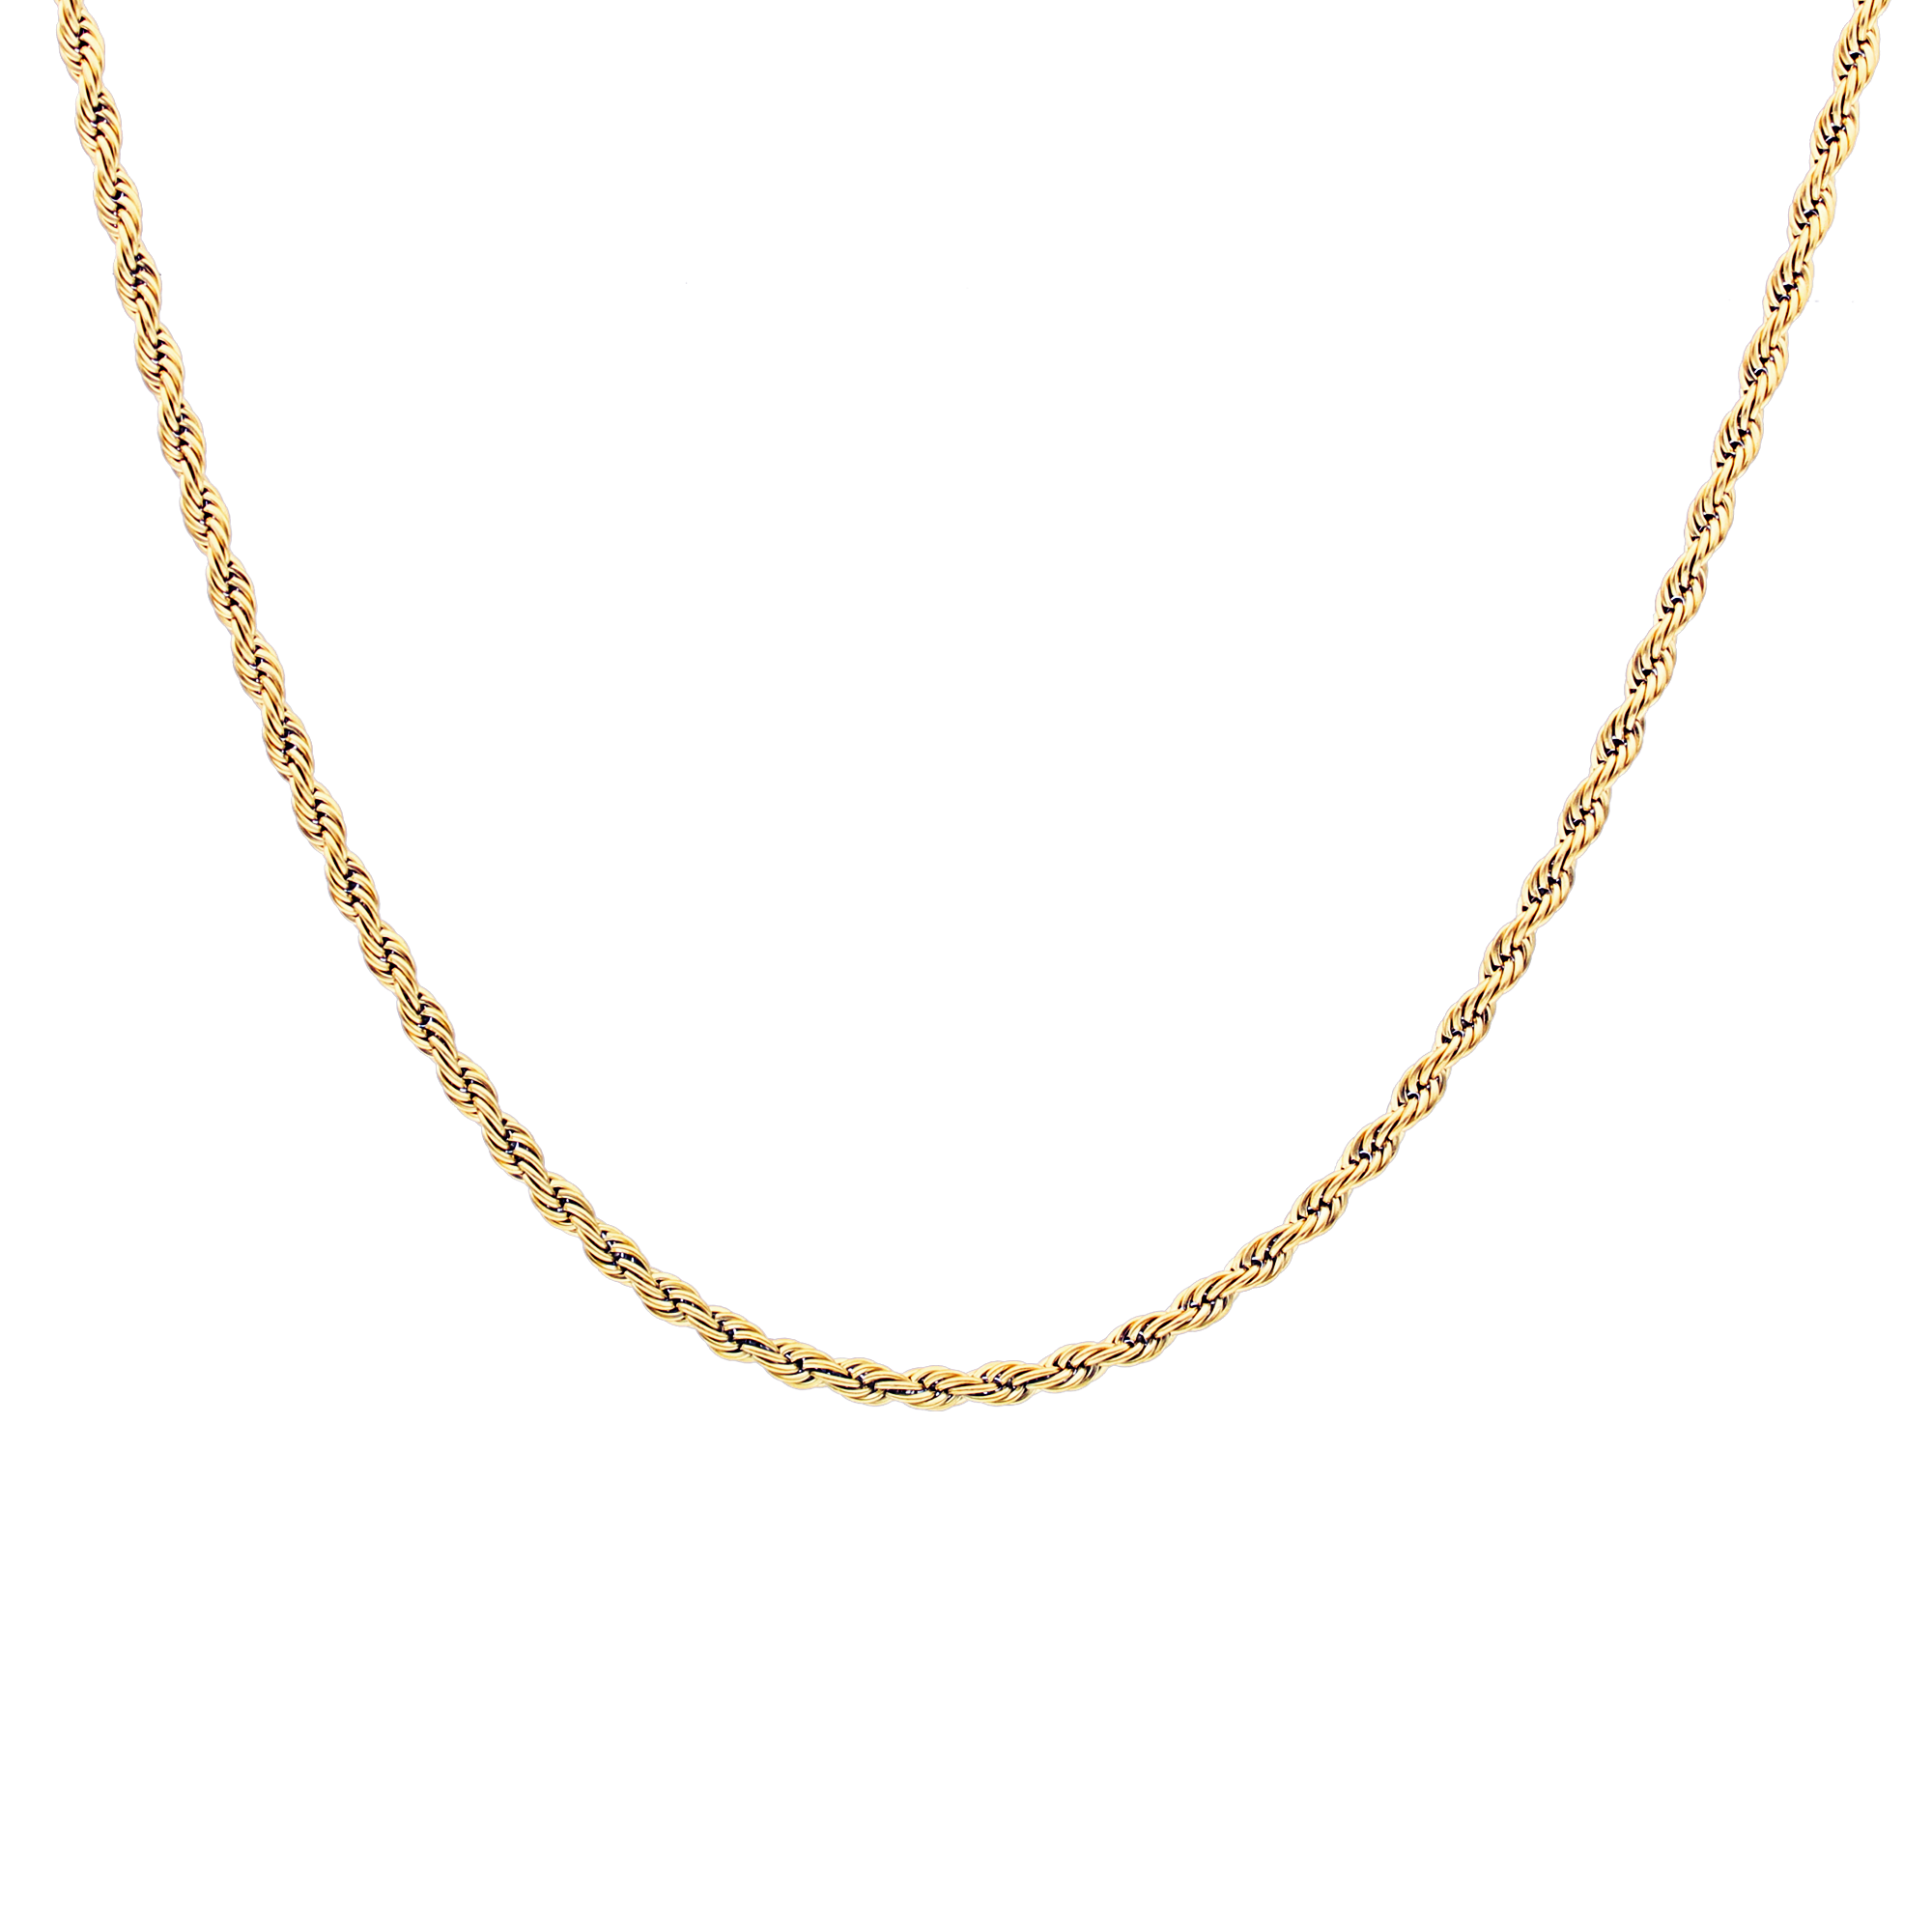 FJ Watches donna necklace French rope twisted chain 18k gold plated women 3.5mm